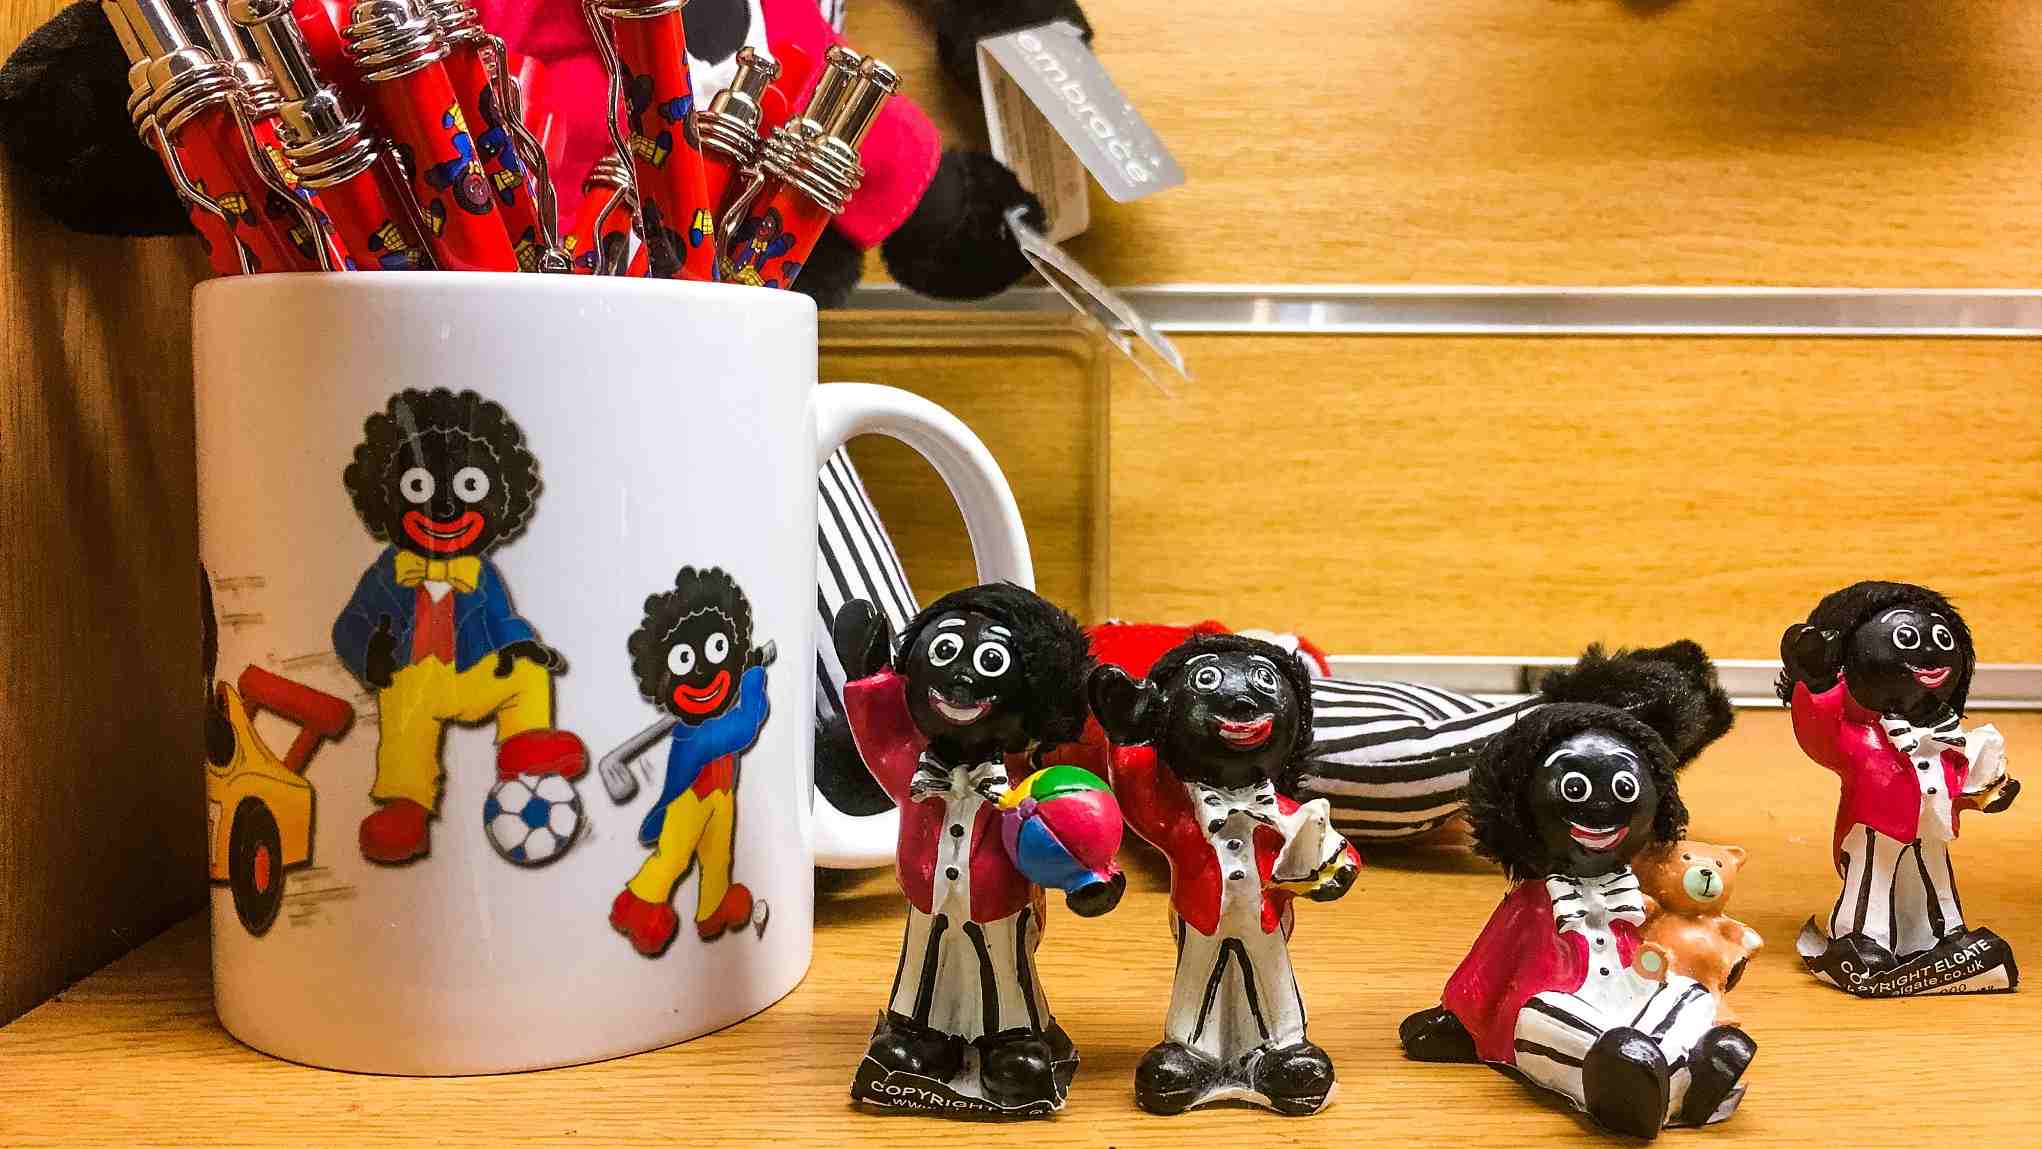 Gift shop in UK village under fire for selling 'blatantly racist' toys